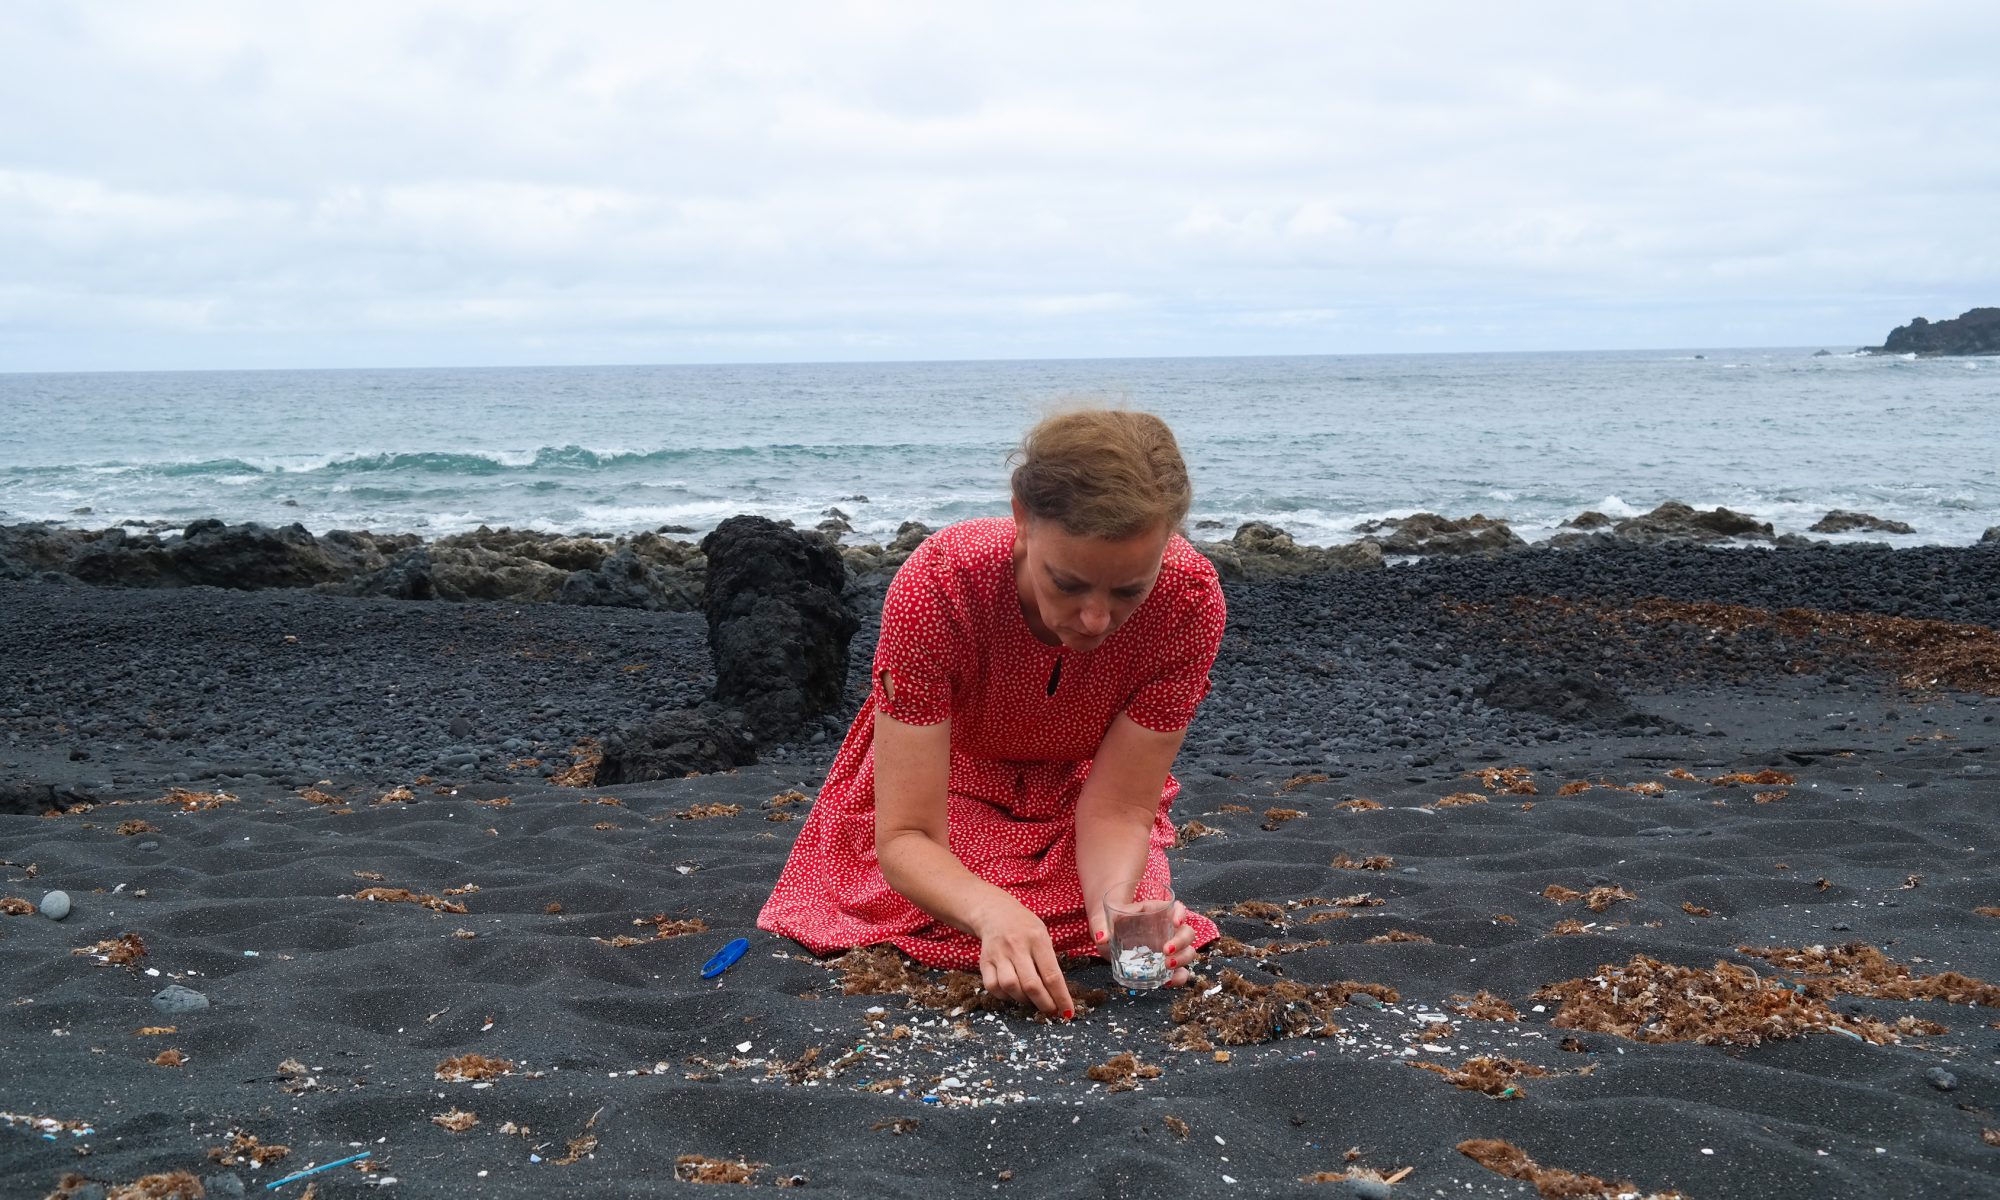 Artist Swaantje Güntzel clears a squaremeter of beach of microplastics in Lanzarote (Spain). During her intervention, she counted 1370 pieces. Image: Jan Philip Scheibe